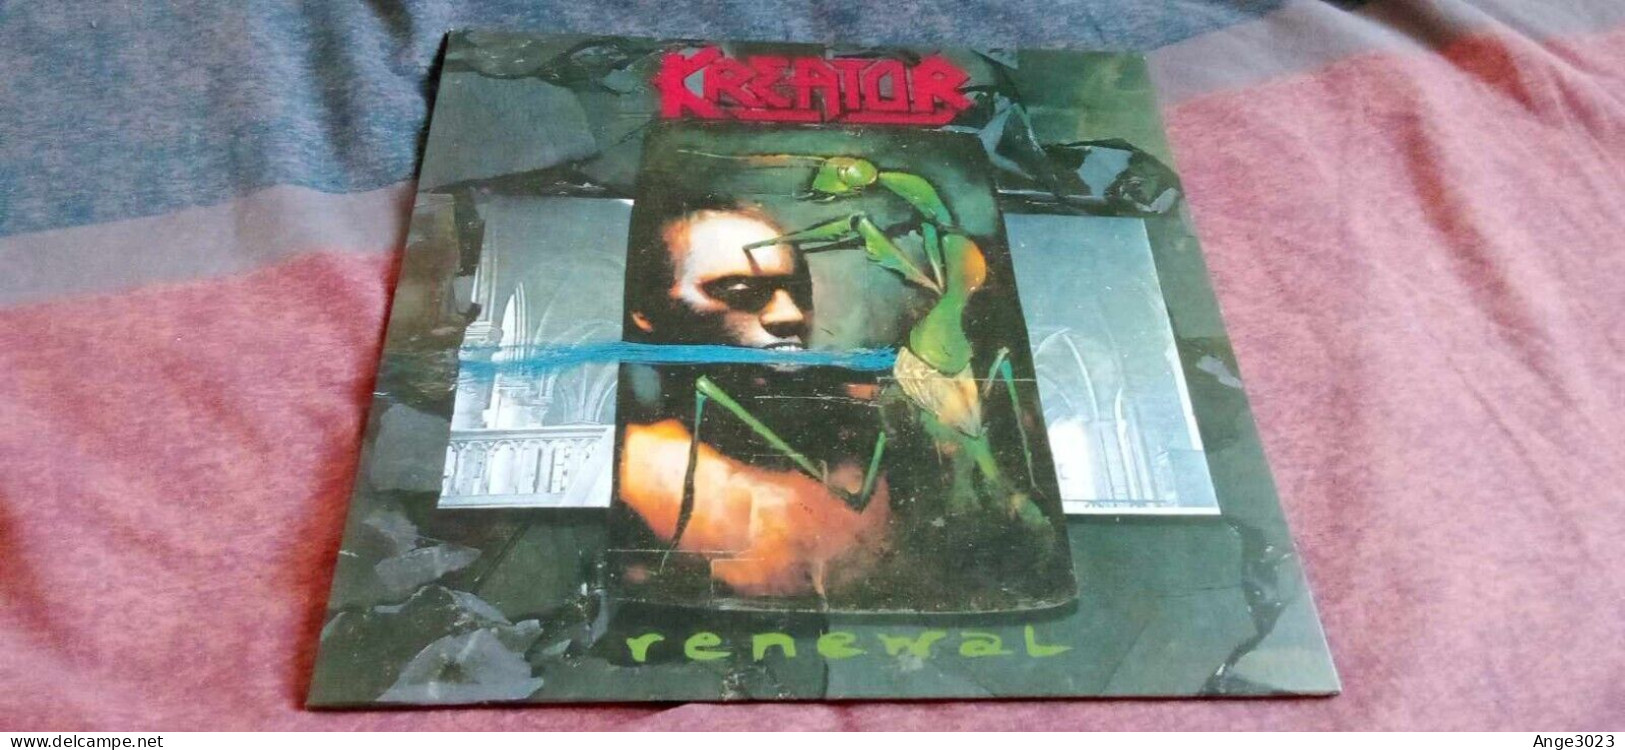 KREATOR "UNDER THE GUILLOTINE"